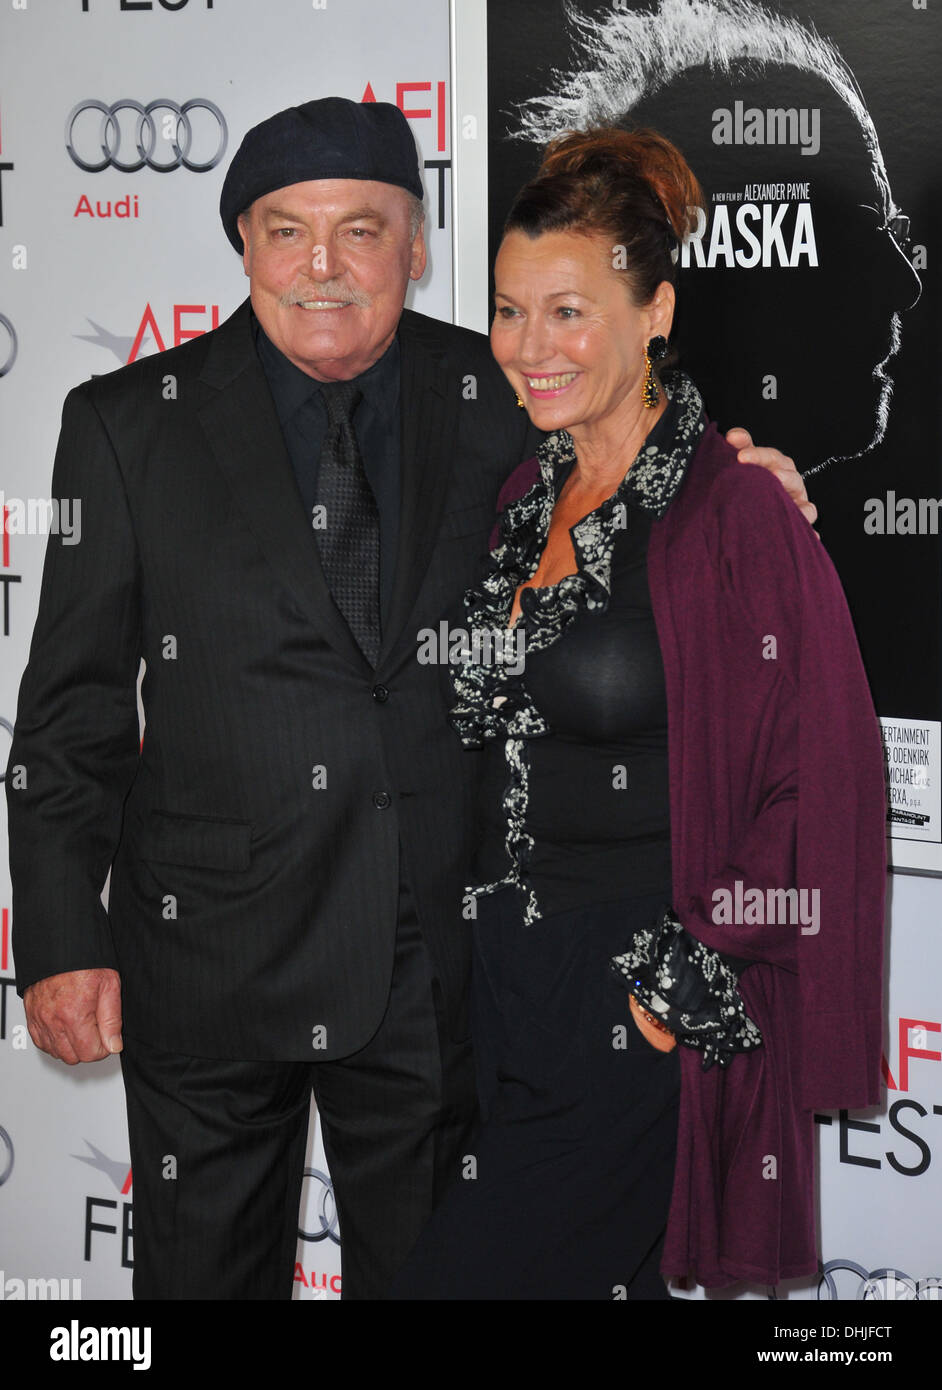 Los Angeles, California, USA. 11th Nov, 2013. Stacy Keach, Wife attending the AFI FEST 2013 Presented By Audi Screening Of ''Nebraska'' held at the TCL Chinese Theatre in Hollywood, California on November 11, 2013. 2013 © D. Long/Globe Photos/ZUMAPRESS.com/Alamy Live News Stock Photo